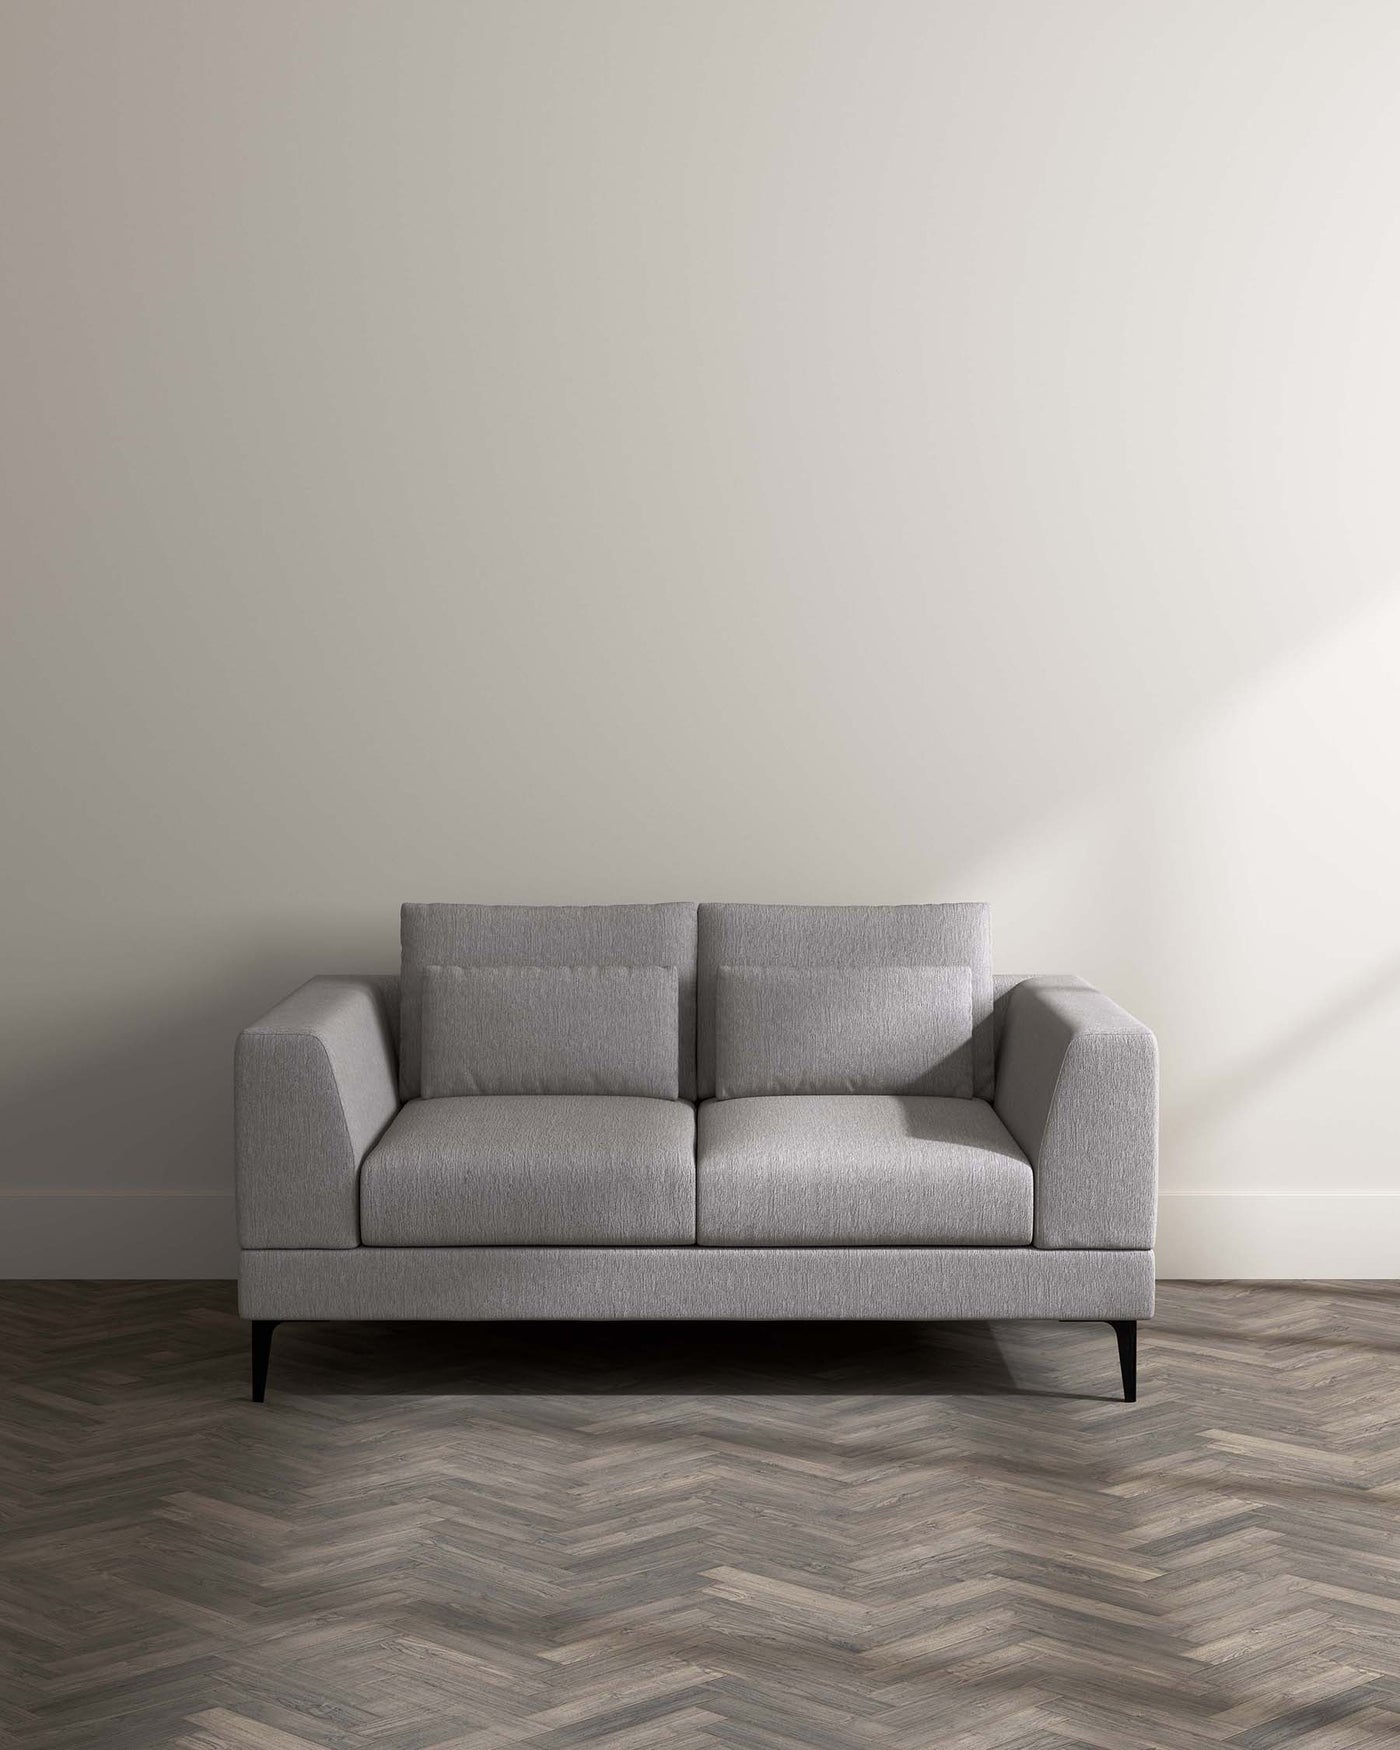 A modern three-seater sofa with light grey upholstery and minimalist design, featuring clean lines, square armrests, and slightly angled black metal legs. The sofa is placed on a herringbone pattern wood flooring against a plain light wall, showcasing a blend of contemporary style and comfort.